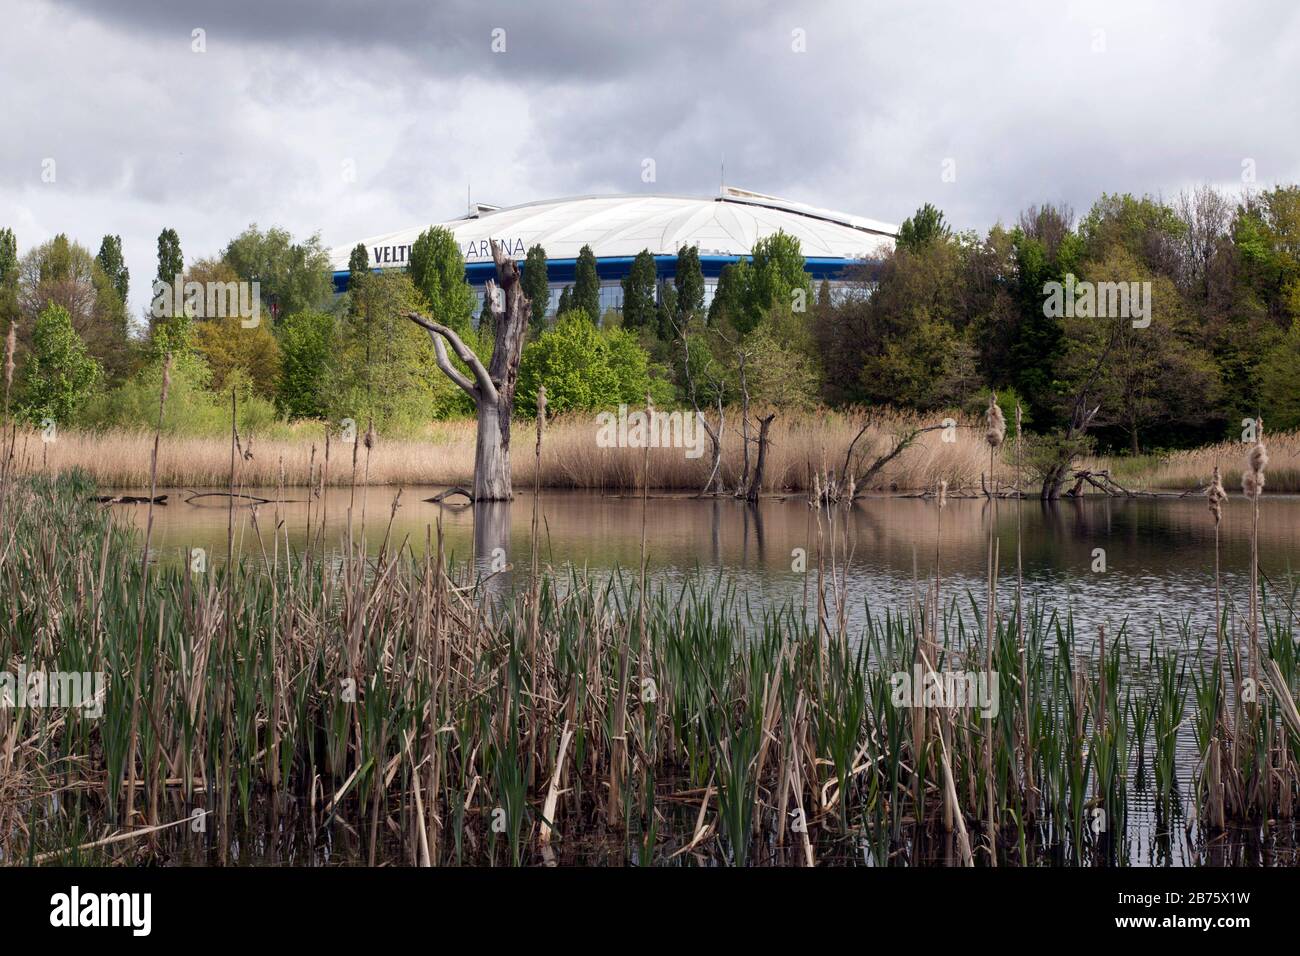 Dead trees will stand in a biotope in front of the Schalke 04 Arena in Gelsenkirchen on 23.04.2017. Maybe this scene is a symbol for the constant up and down of the Schalke 04. [automated translation] Stock Photo